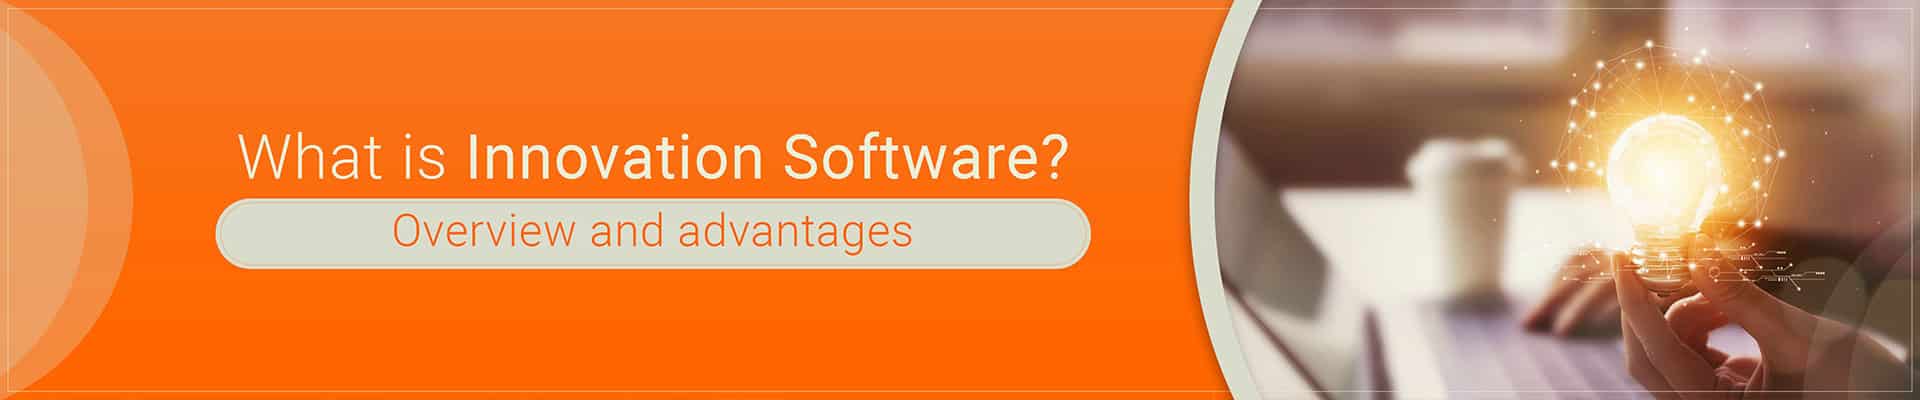 what-is-innovation-software-overview-advantages-innolytics-innovation